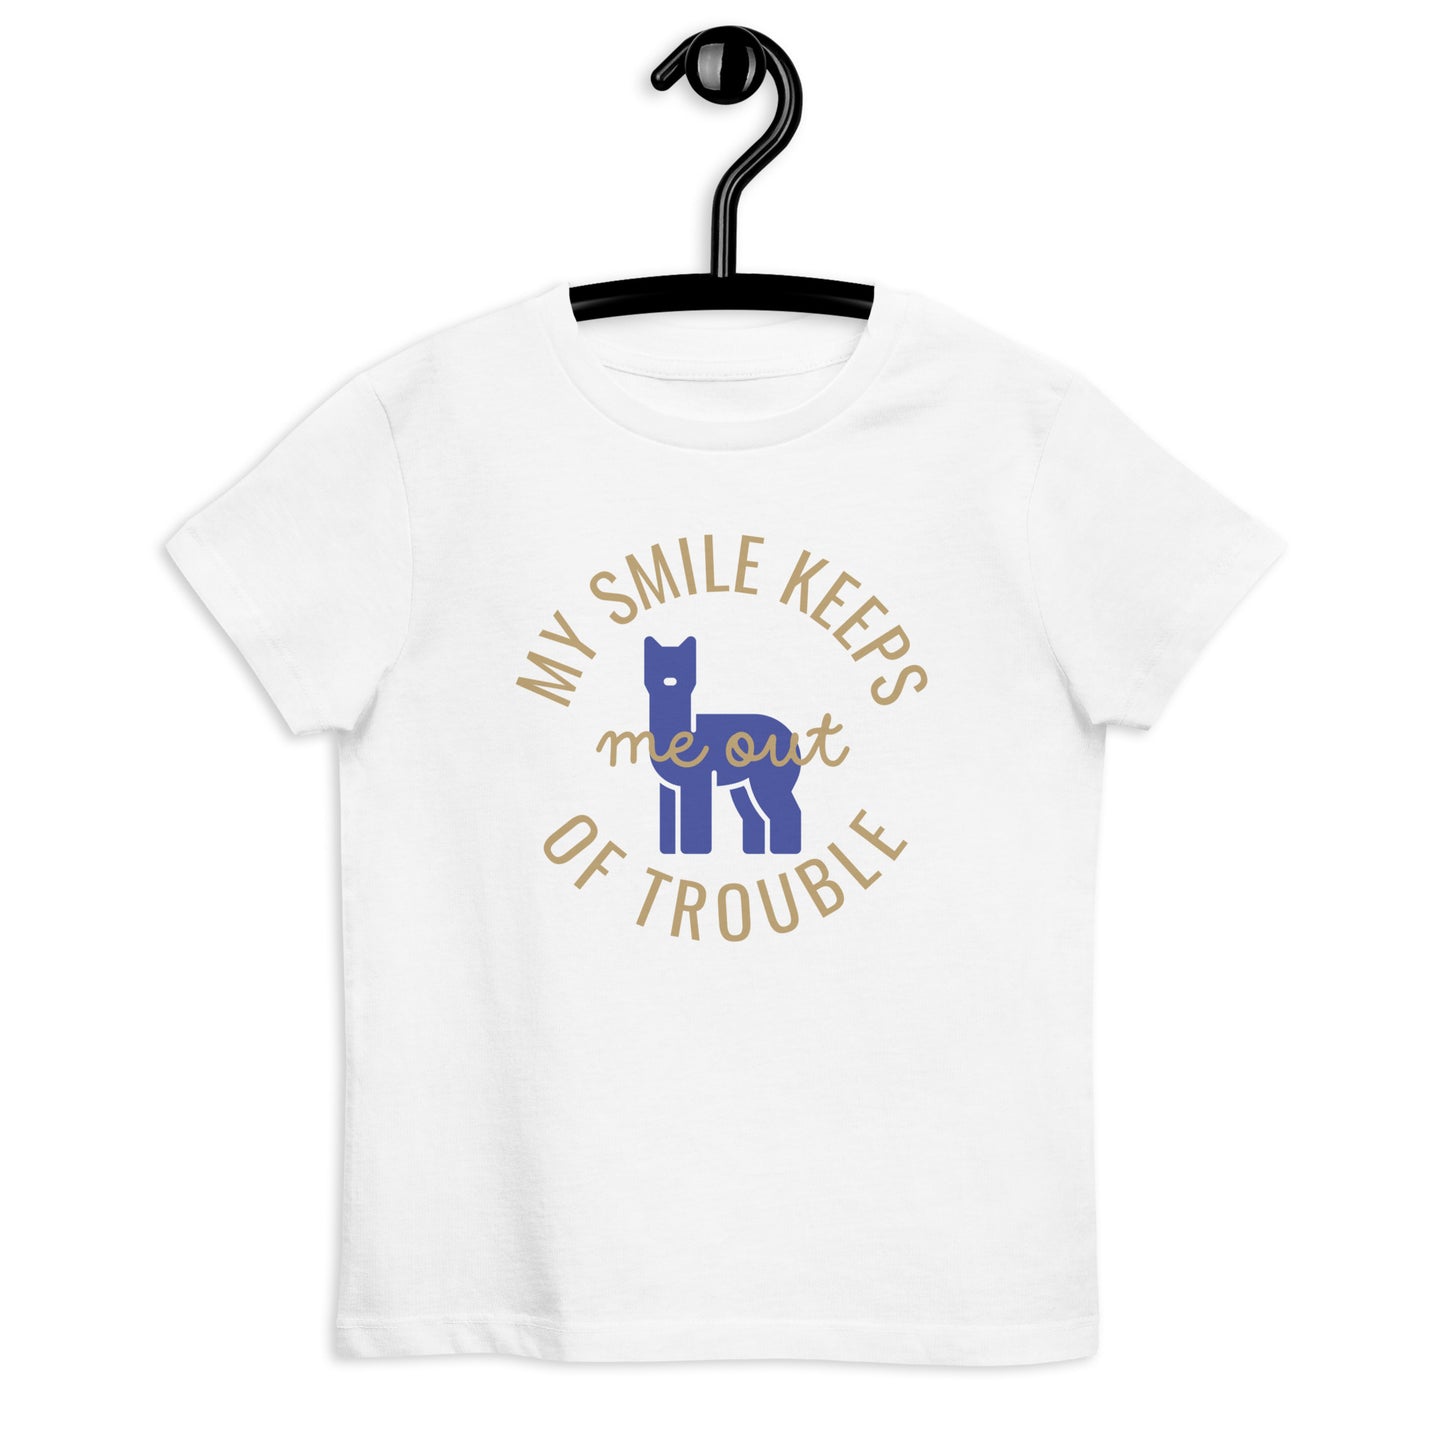 My Smile Keeps Me Out Of Trouble Organic Cotton Kids T-shirt